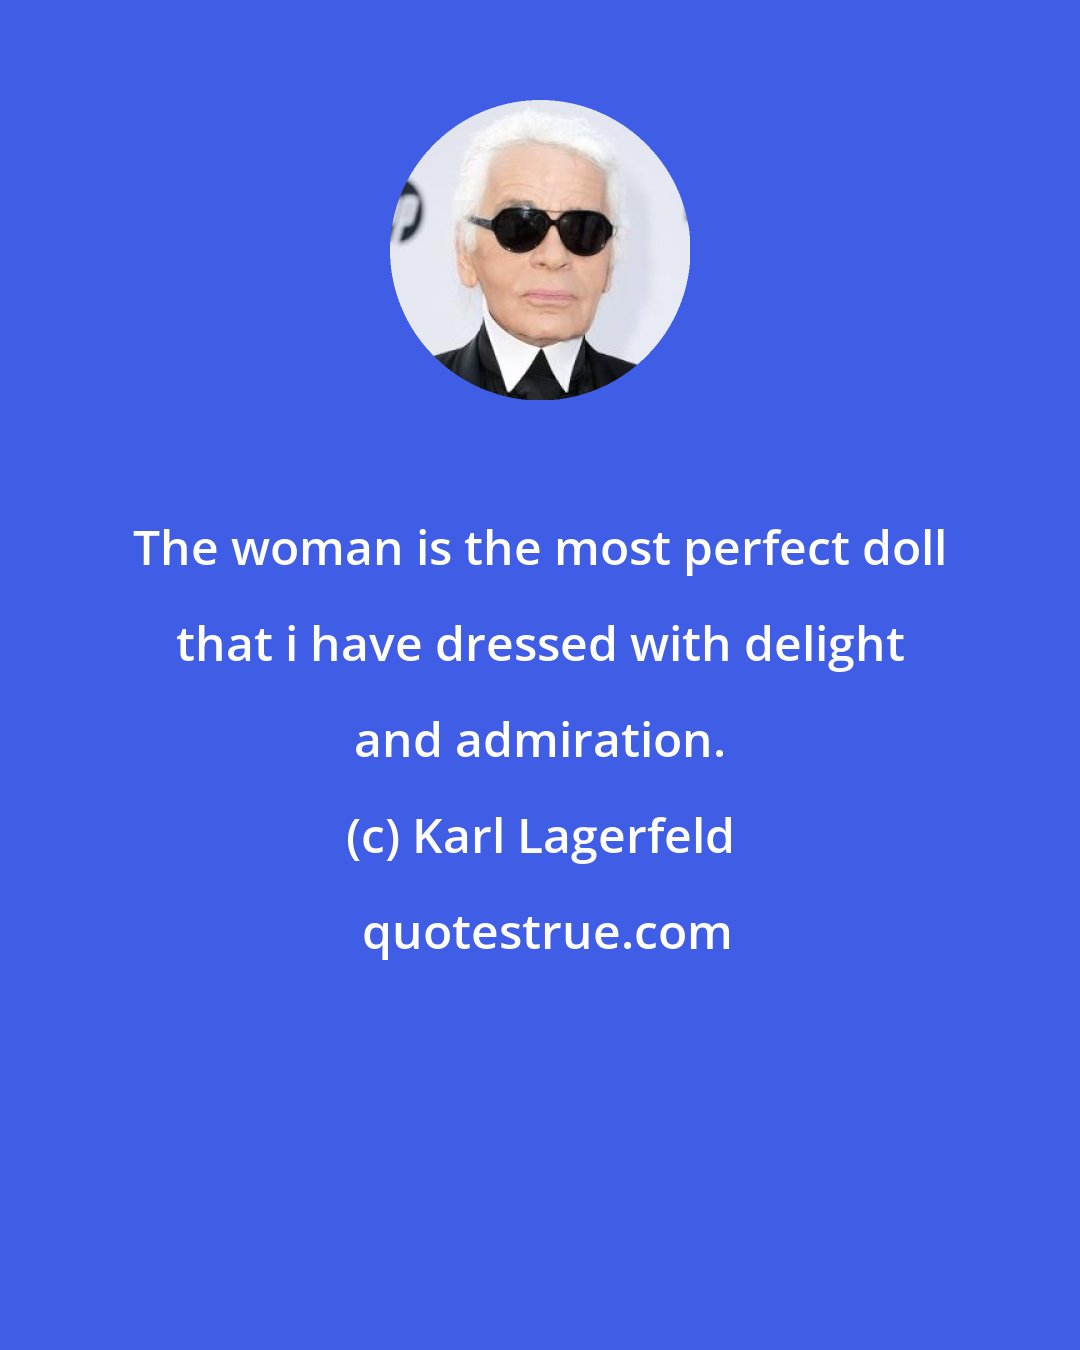 Karl Lagerfeld: The woman is the most perfect doll that i have dressed with delight and admiration.